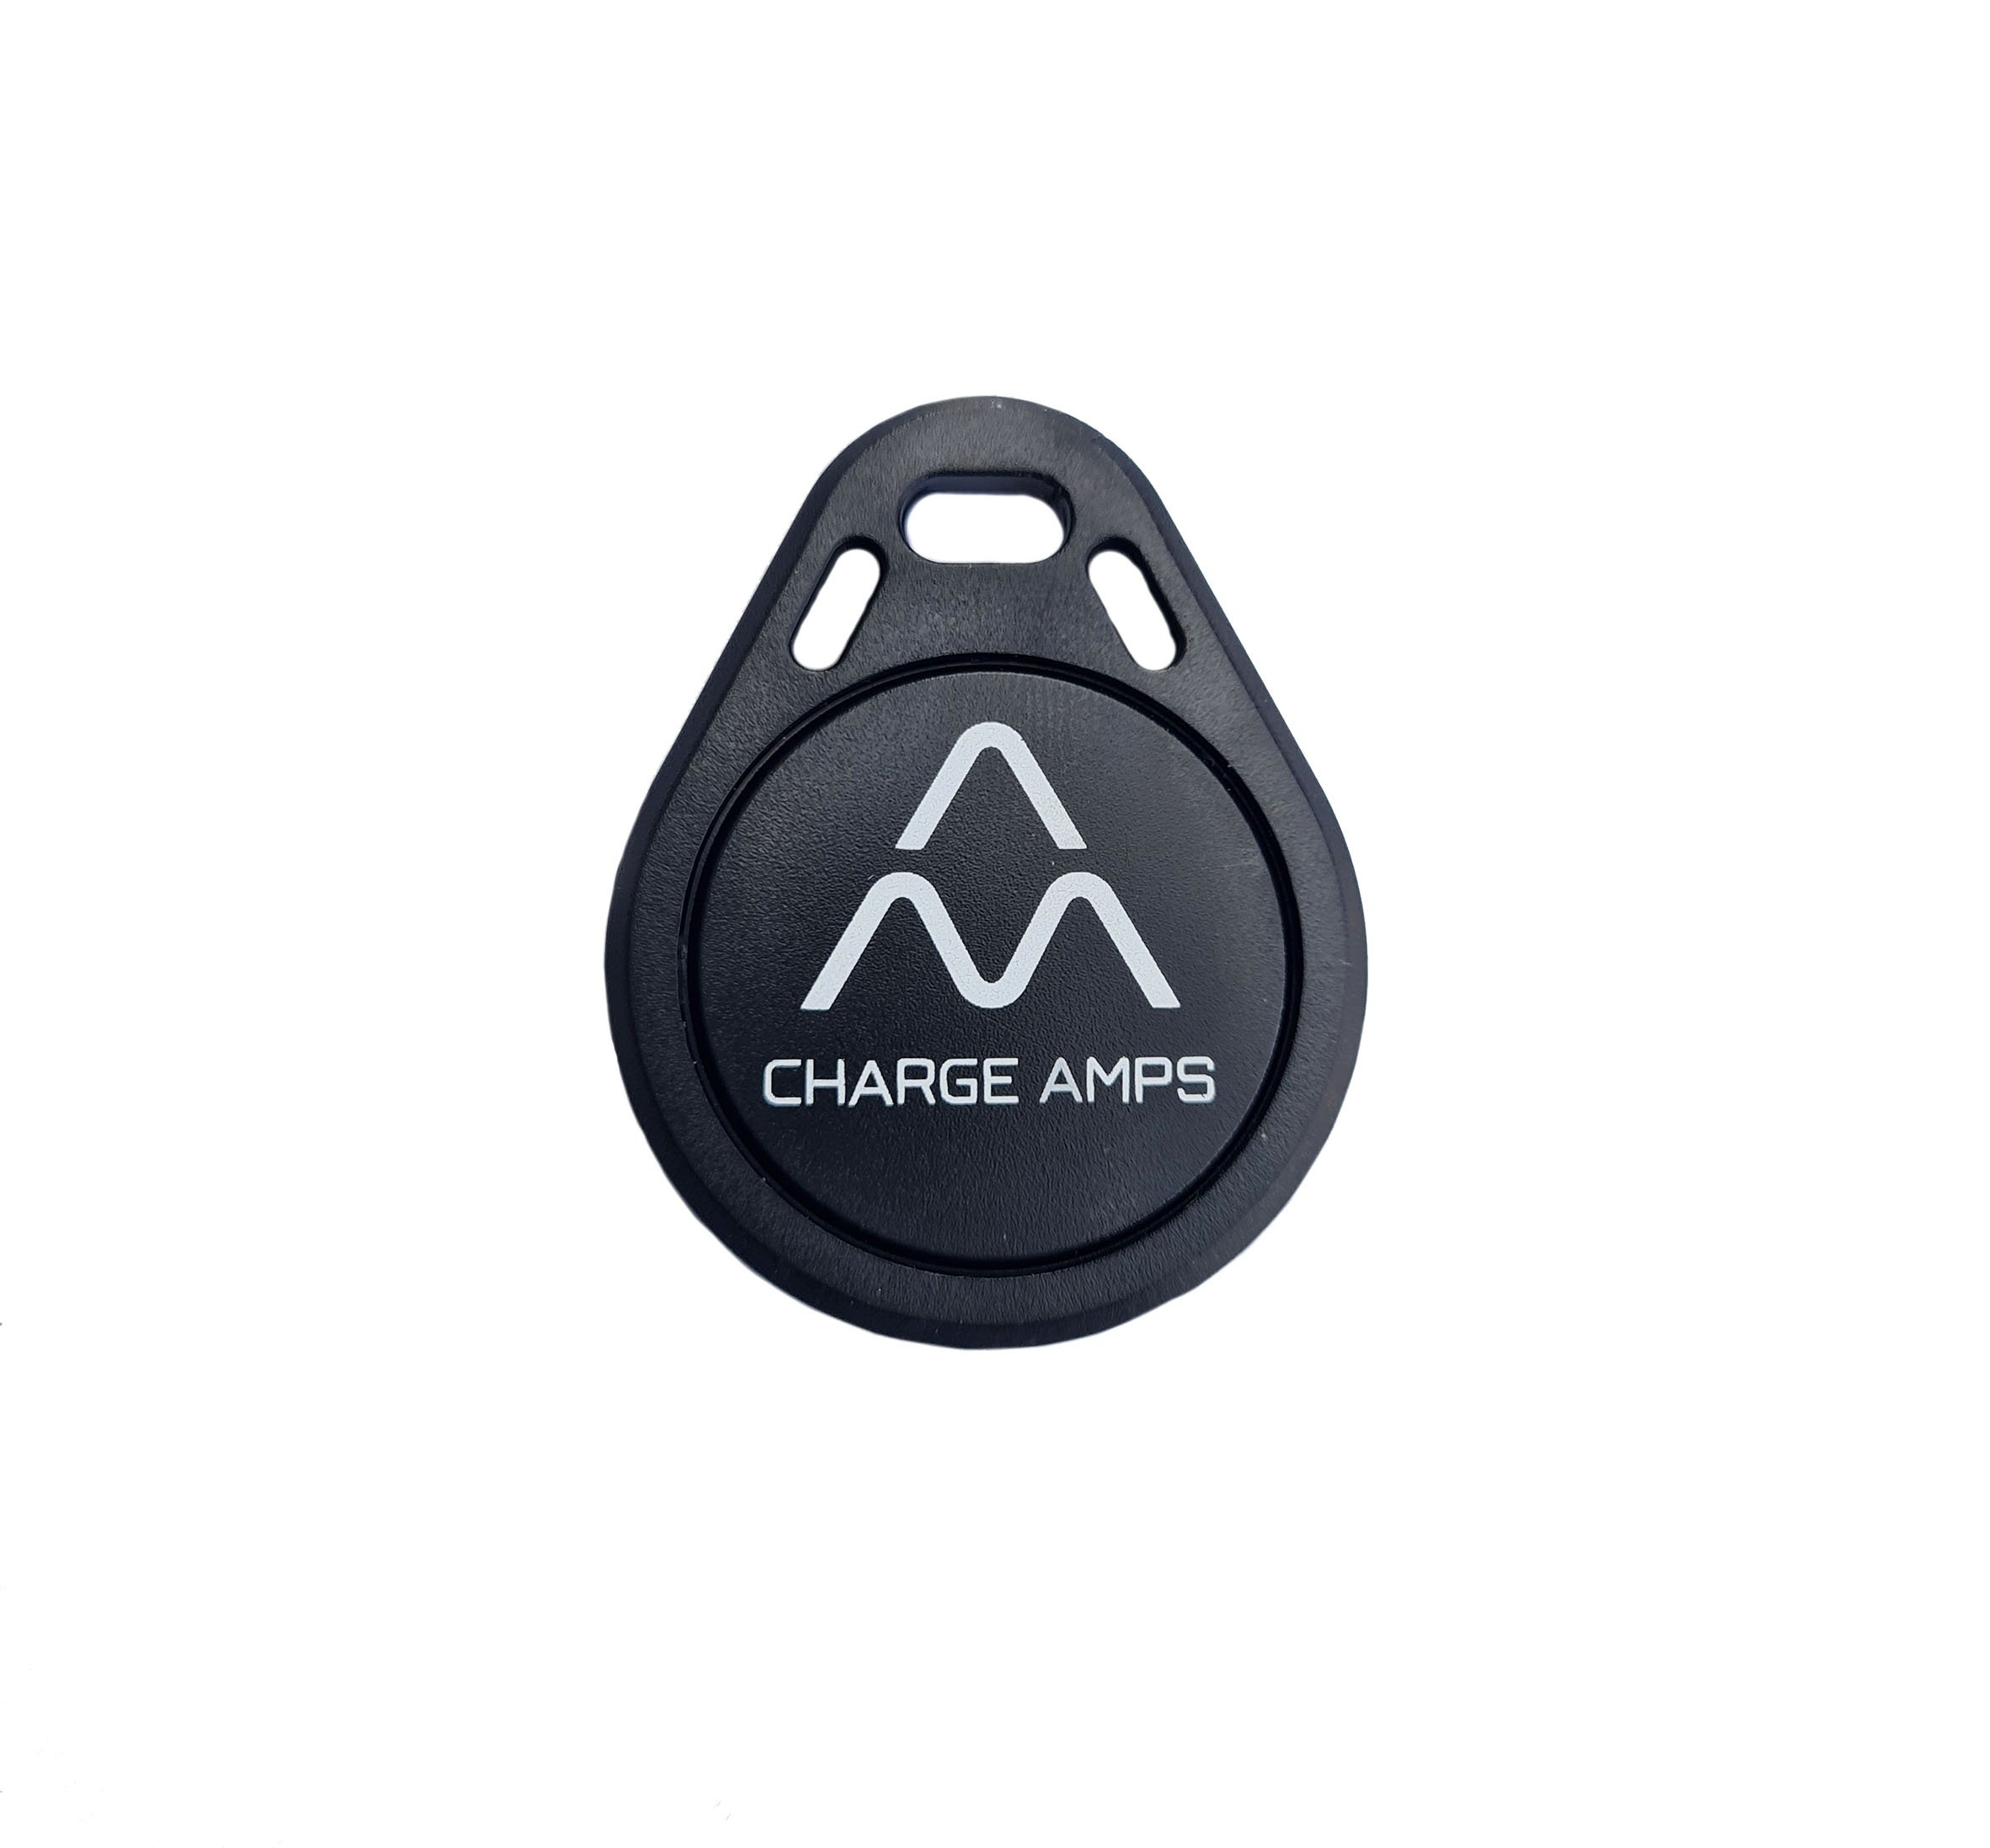 Charge Amps RFID-Tag 